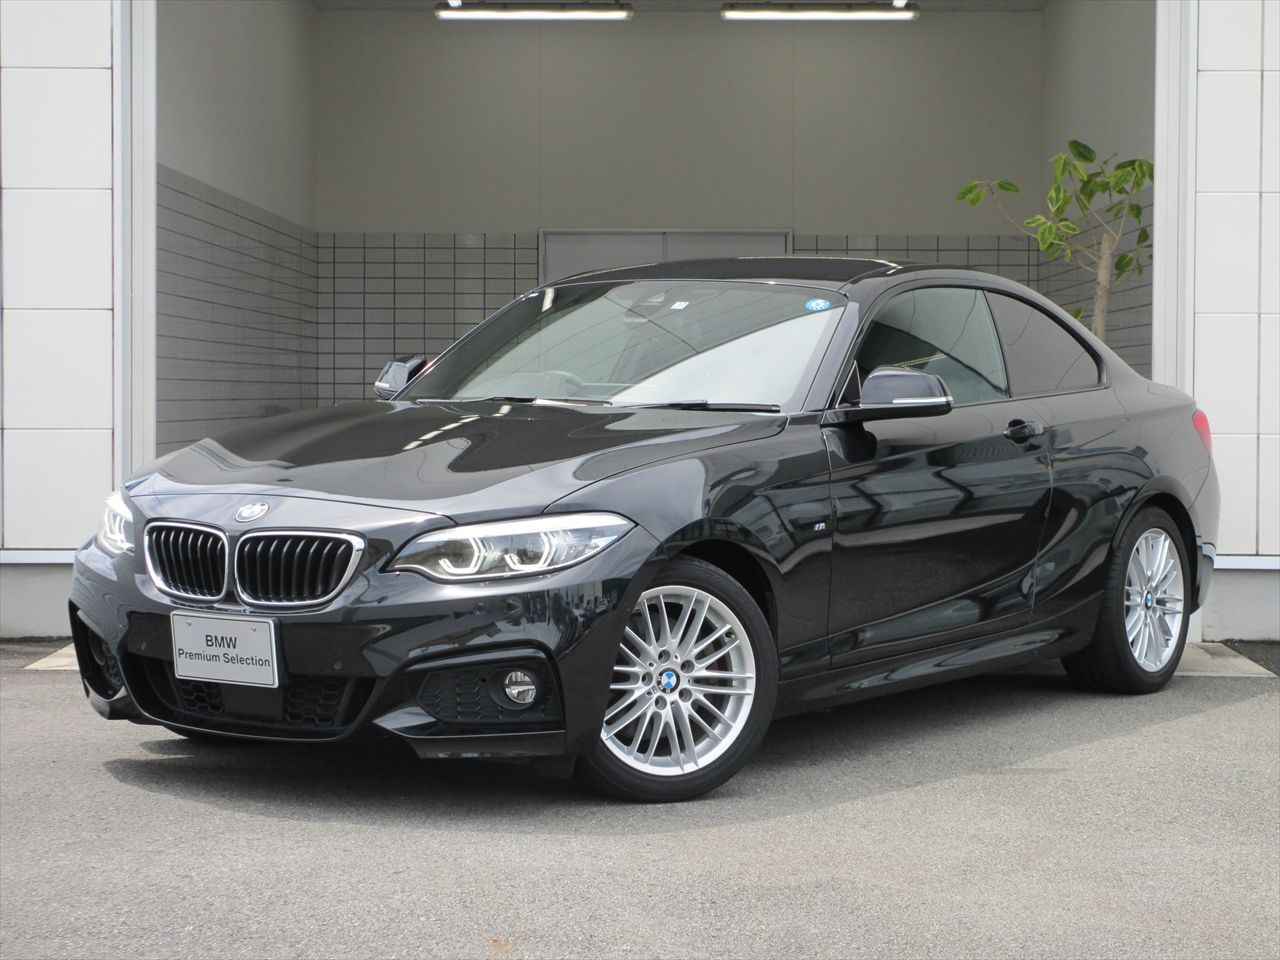 220i Coupe M Sport